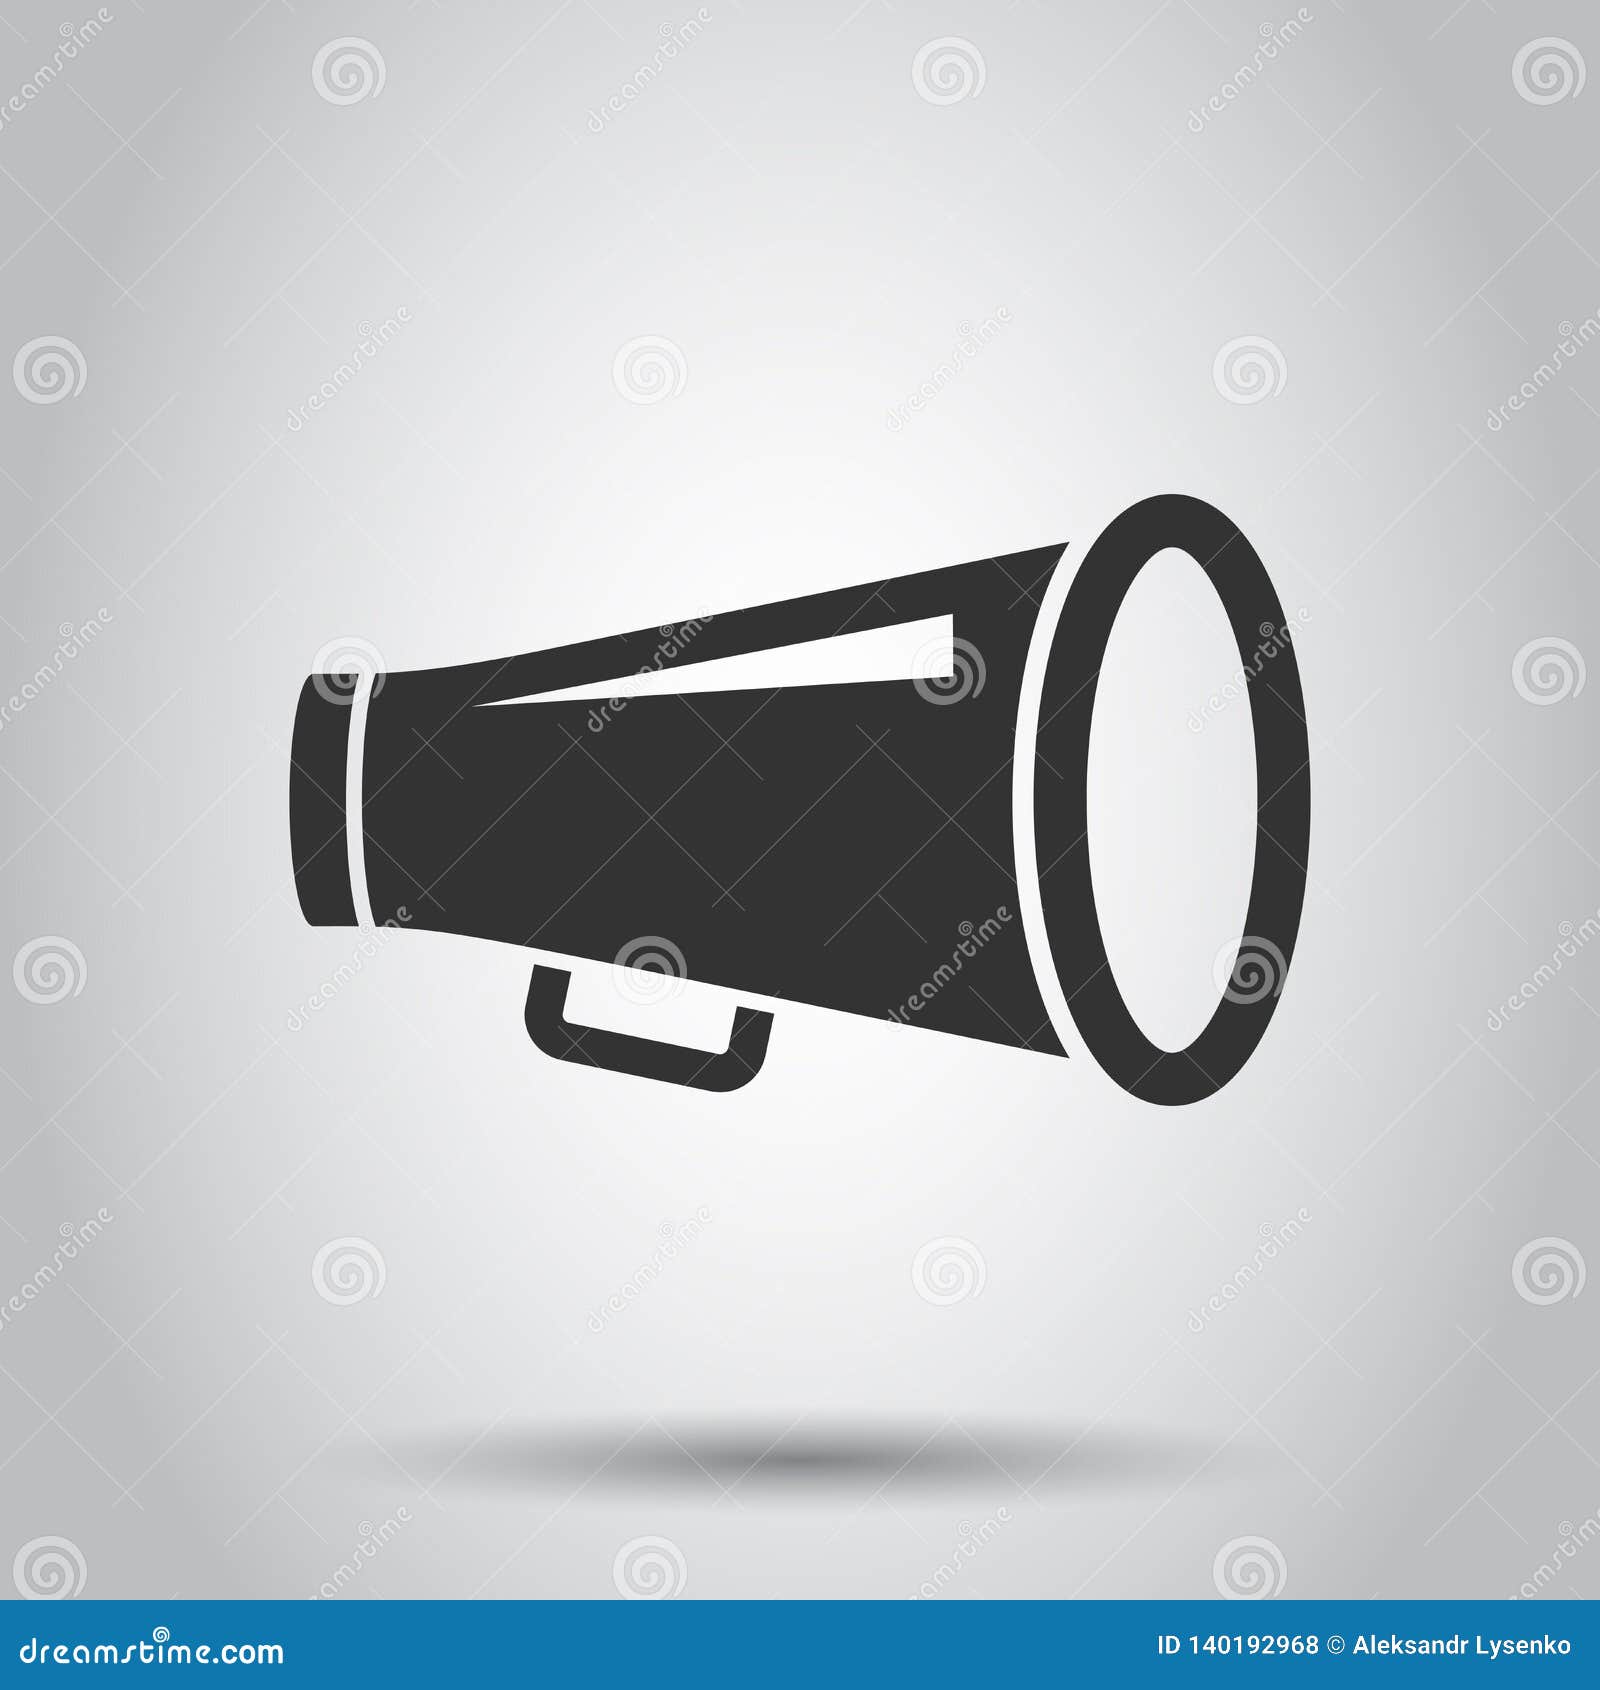 megaphone speaker icon in flat style. bullhorn audio announcement   on white background. megaphone broadcasting